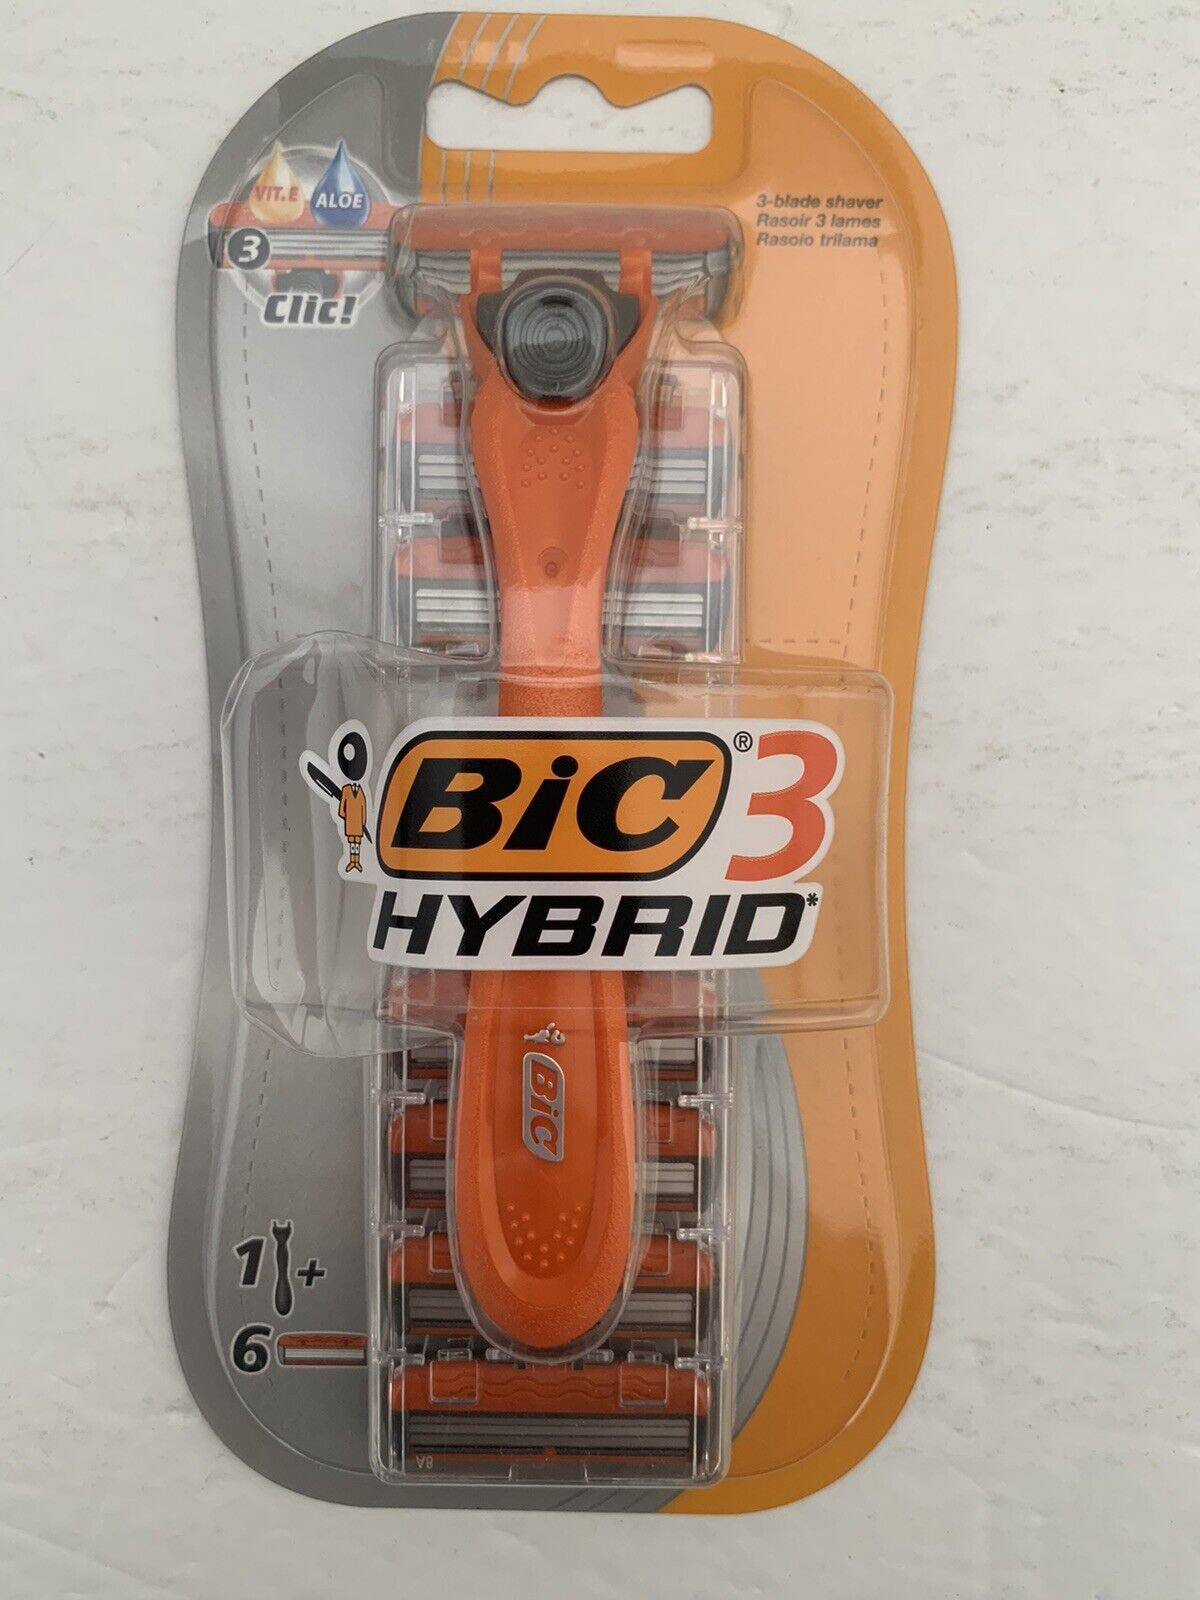 Primary image for BIC 3 Hybrid Orange color 3-blade Shaver Handle with 6 Cartridges